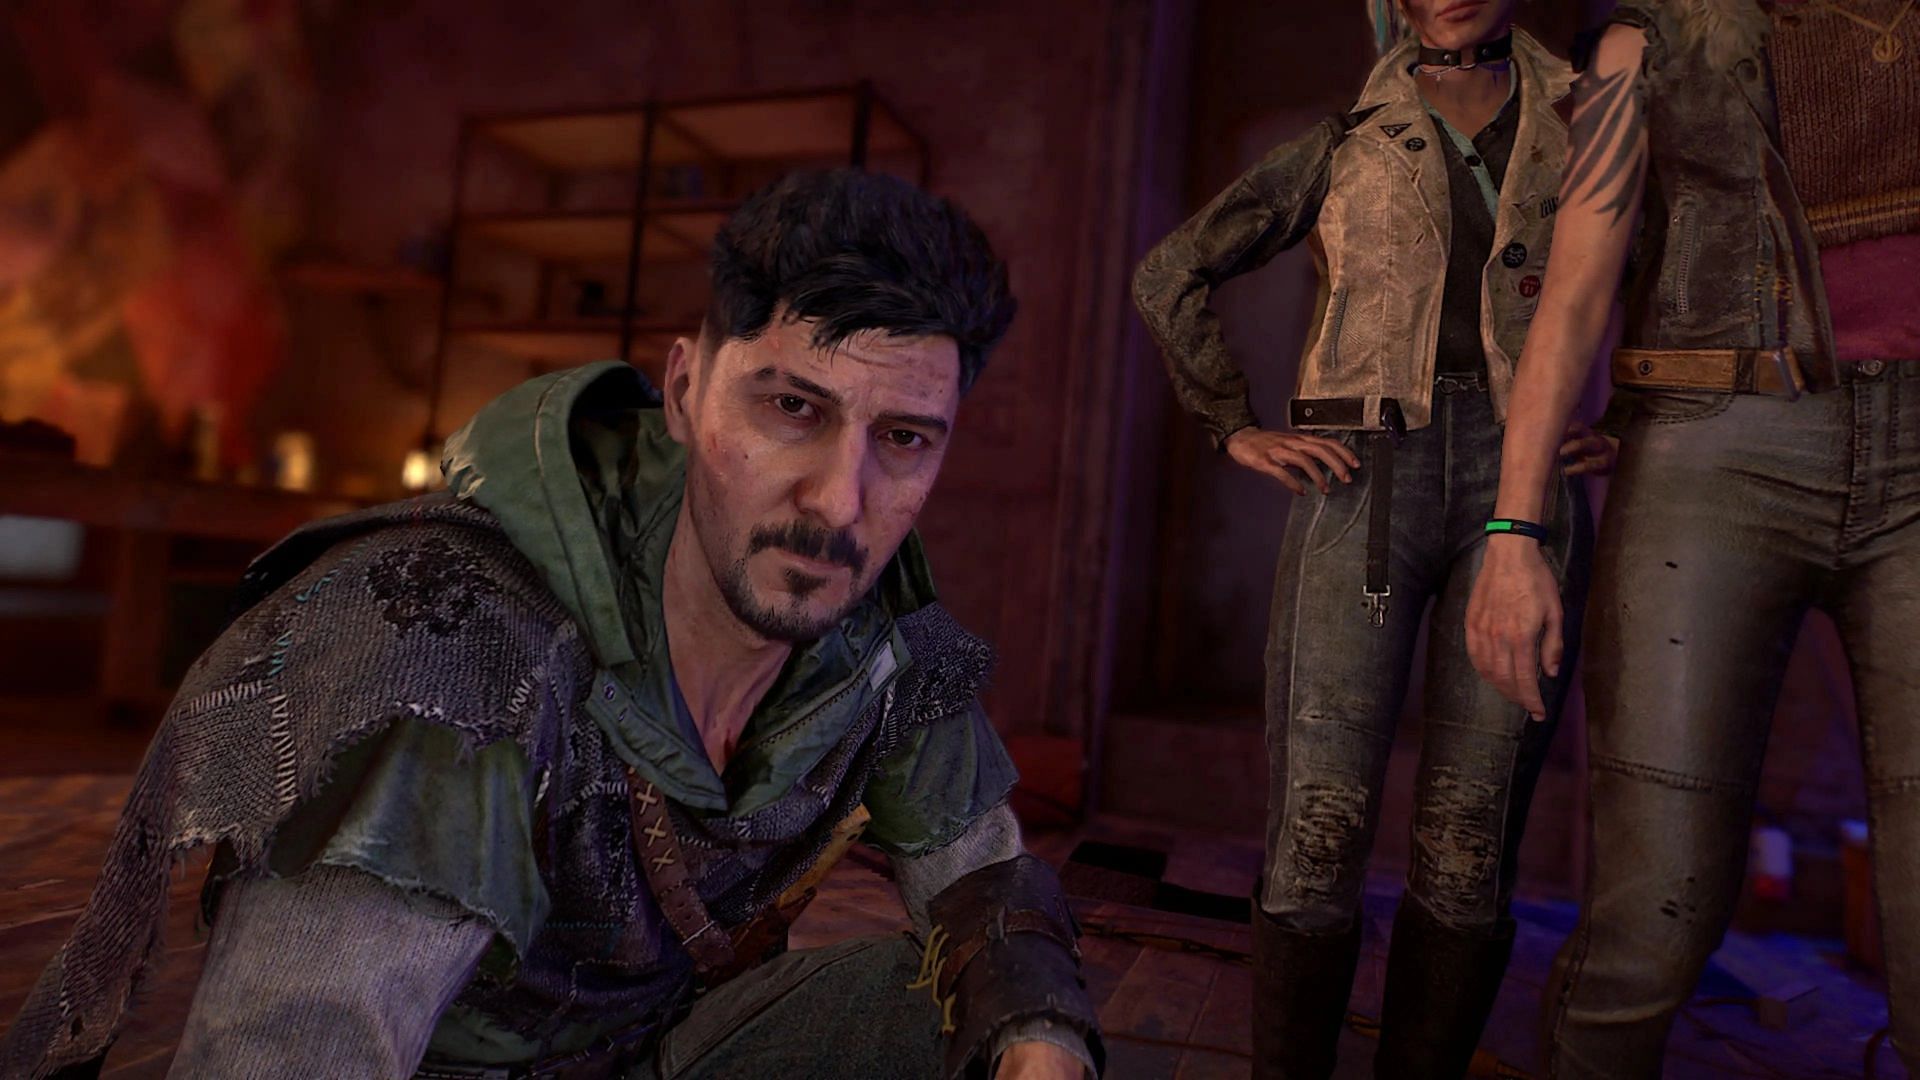 Hakon, one of the characters player character meets in game, is based on the likeness of David Belle (Image via Dying Light 2)